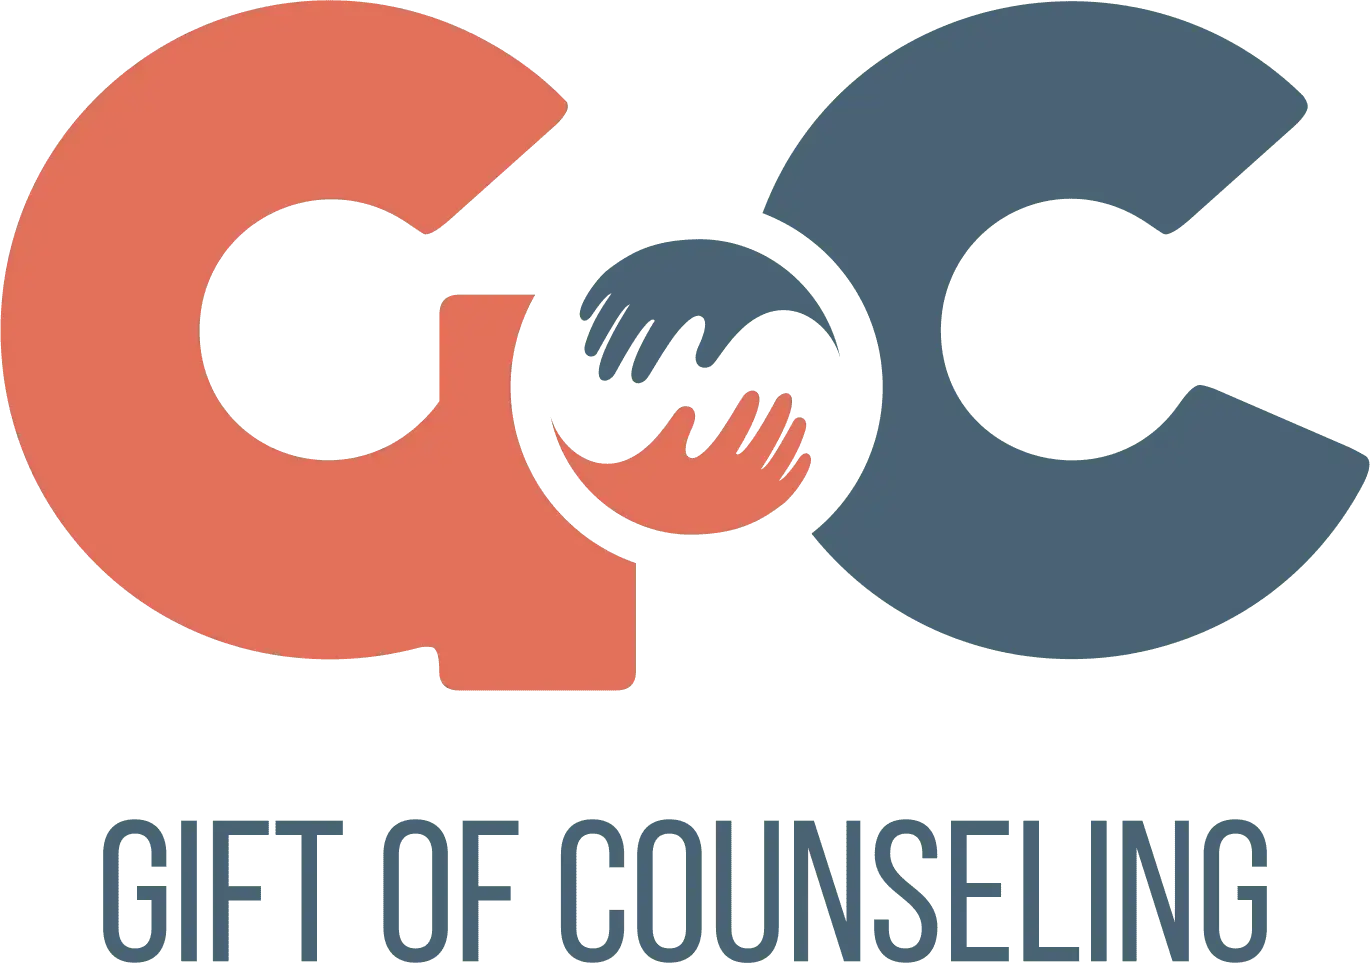 Gift of Counseling